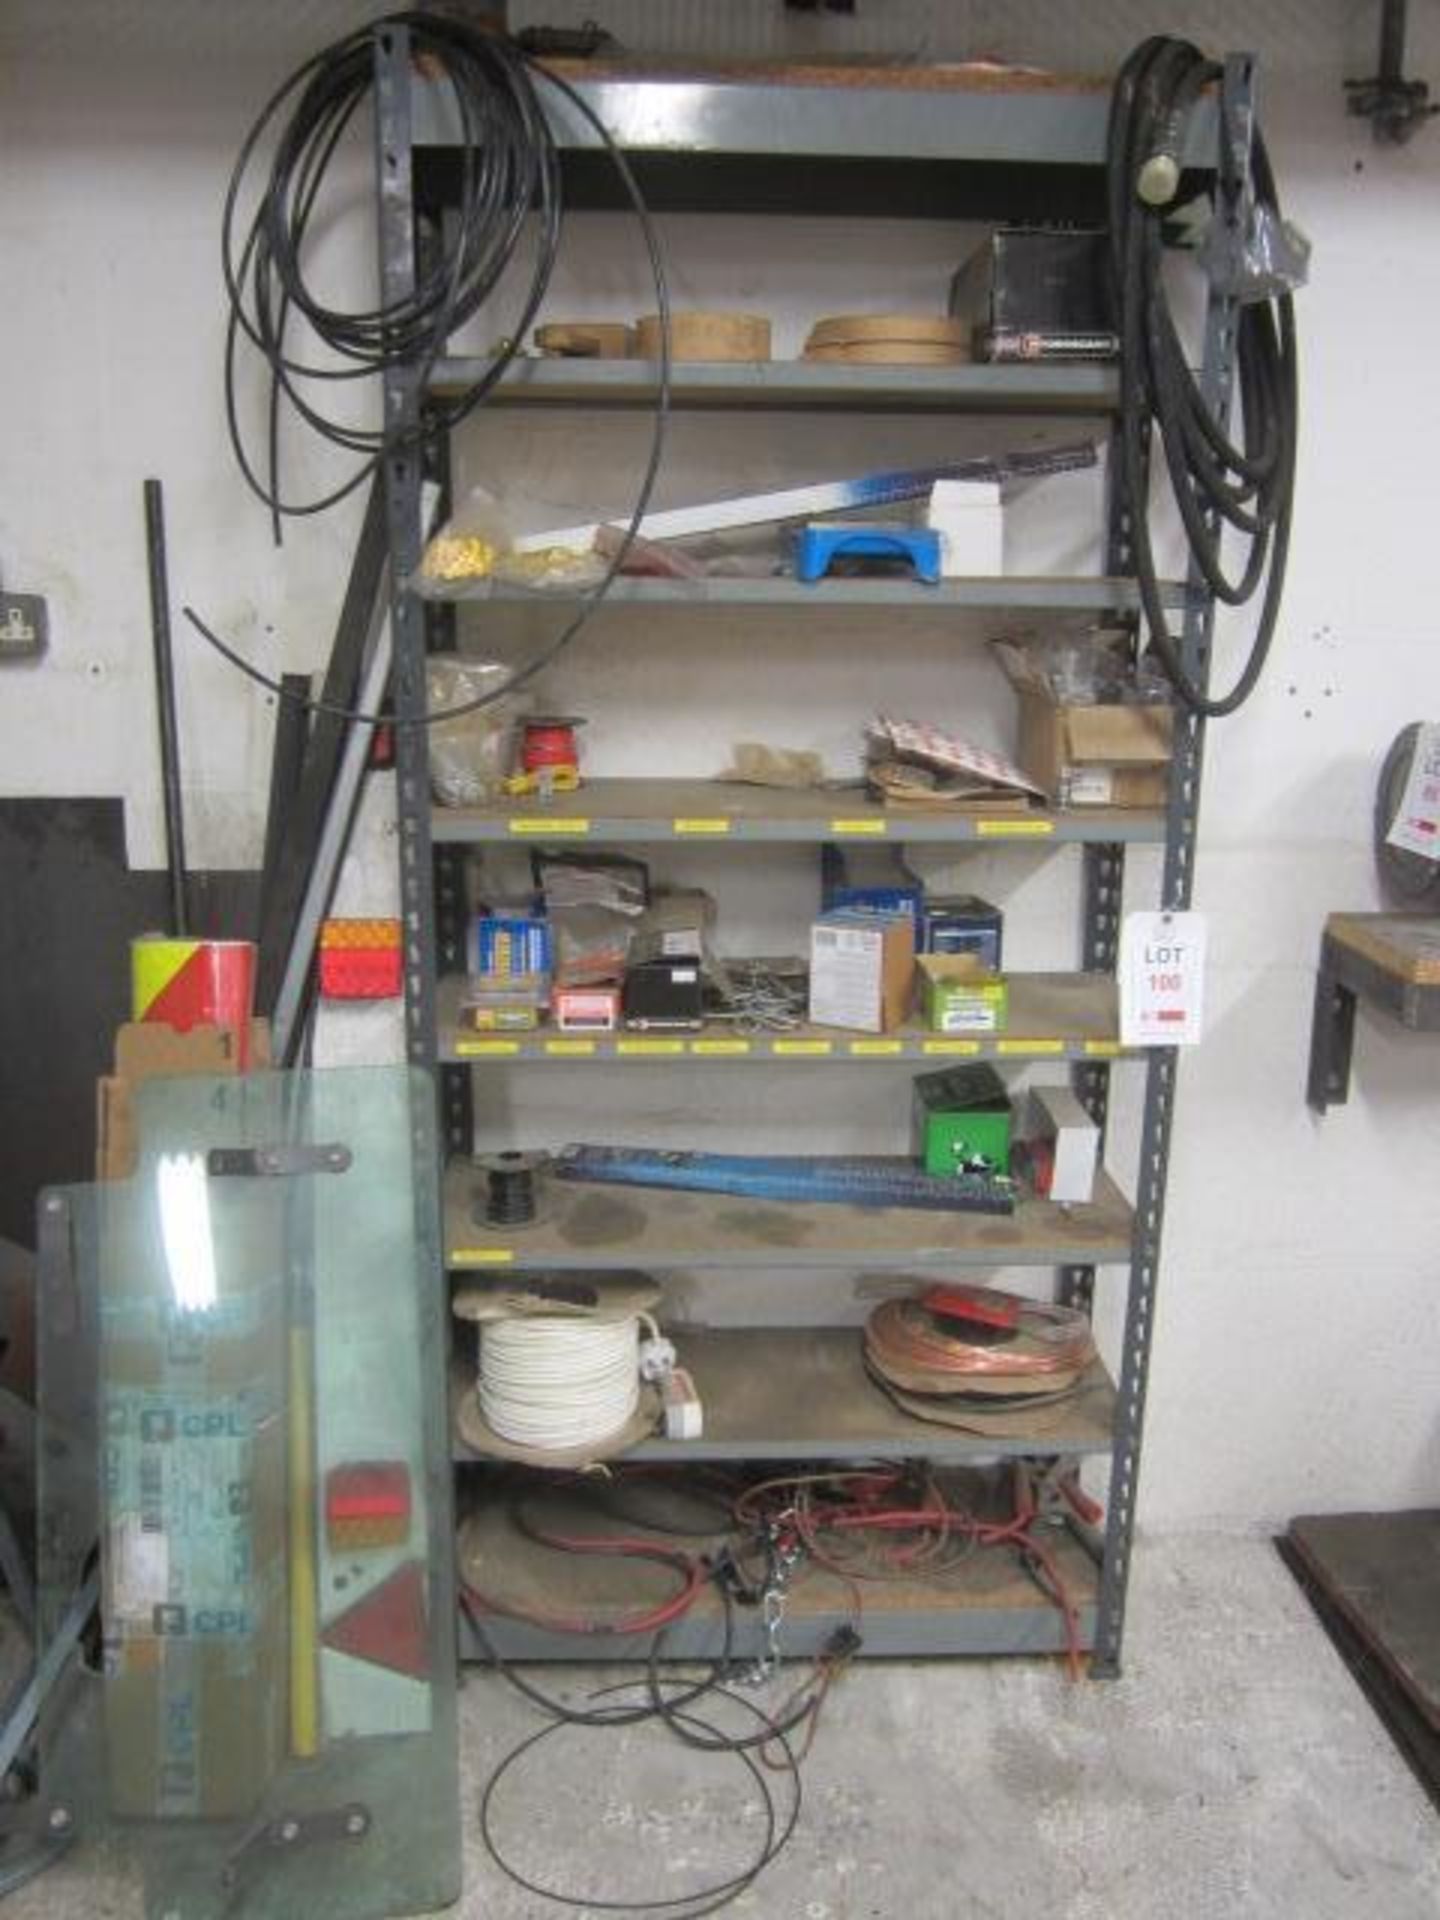 Rack with contents including wood screws, two reels of electrical wire, cable ties, etc.